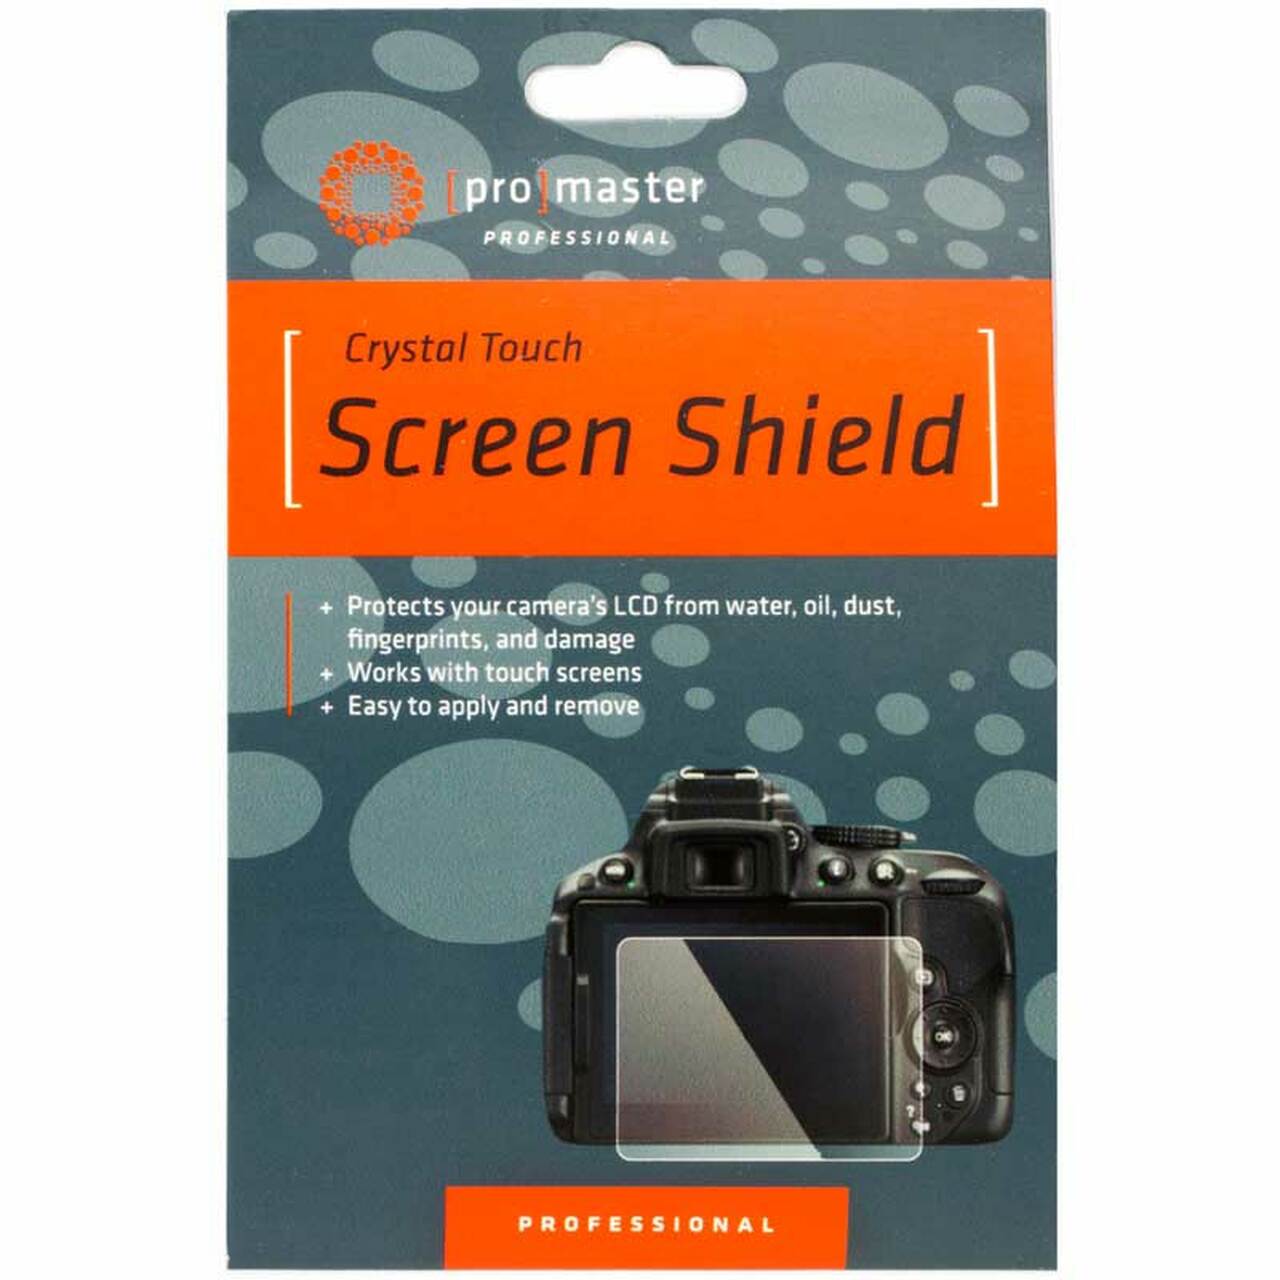 Promaster 3314 Crystal Touch Screen Protector Compatible with Nikon Z6, Z7, Z6ii, Z7ii, Z9